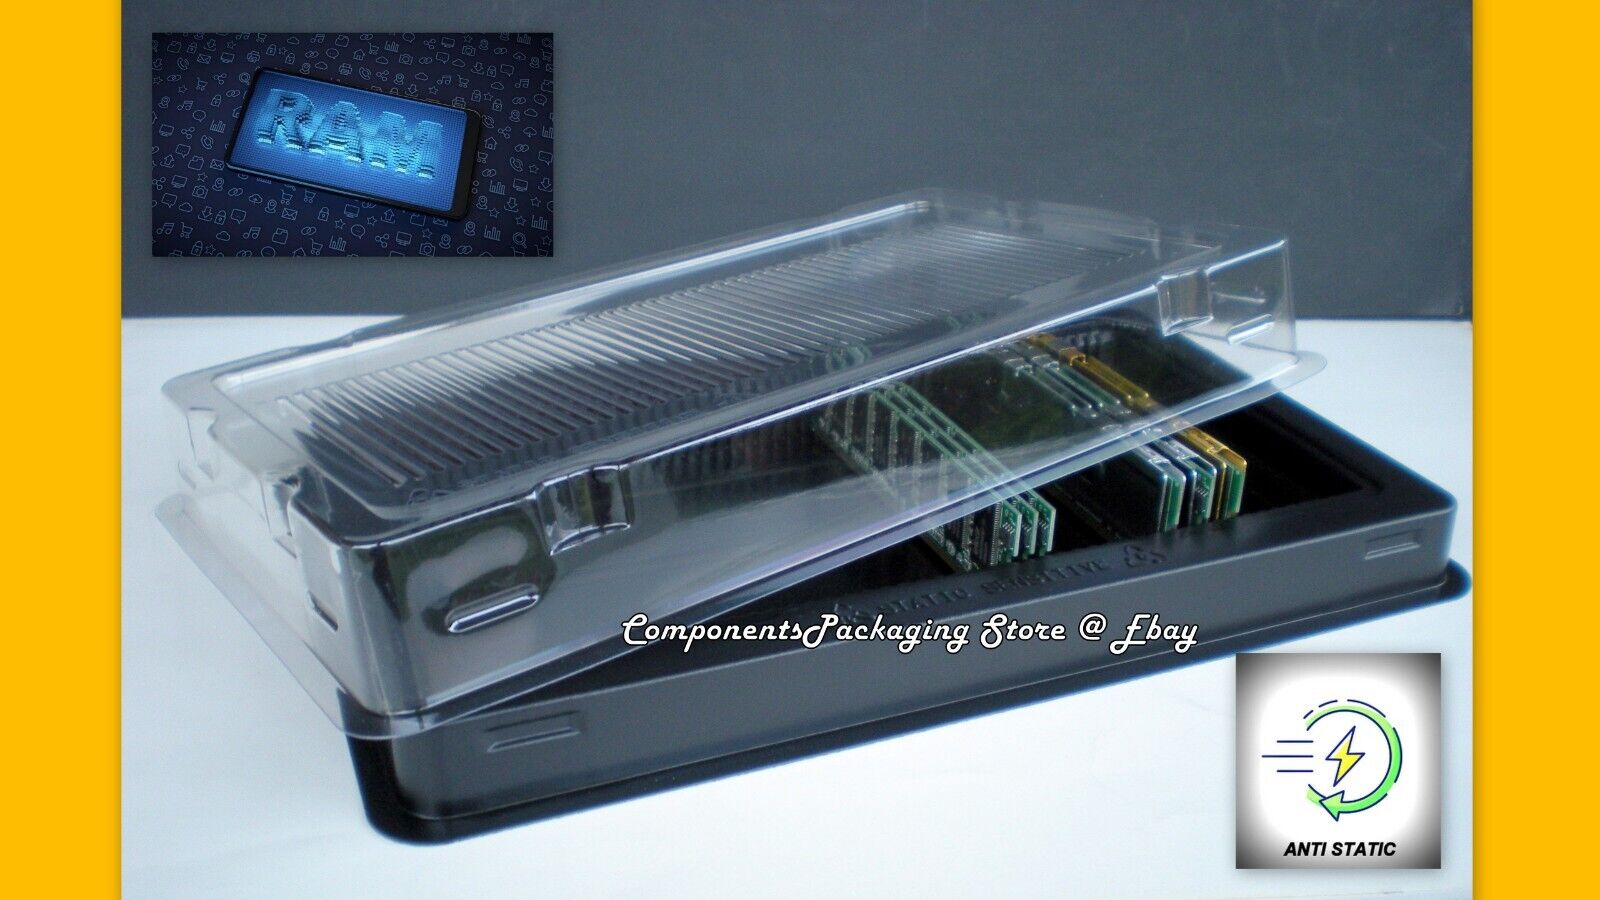 5 - Long DIMM RAM DDR DIMM Packaging Box Container 50 slots Trays fits 250 - New